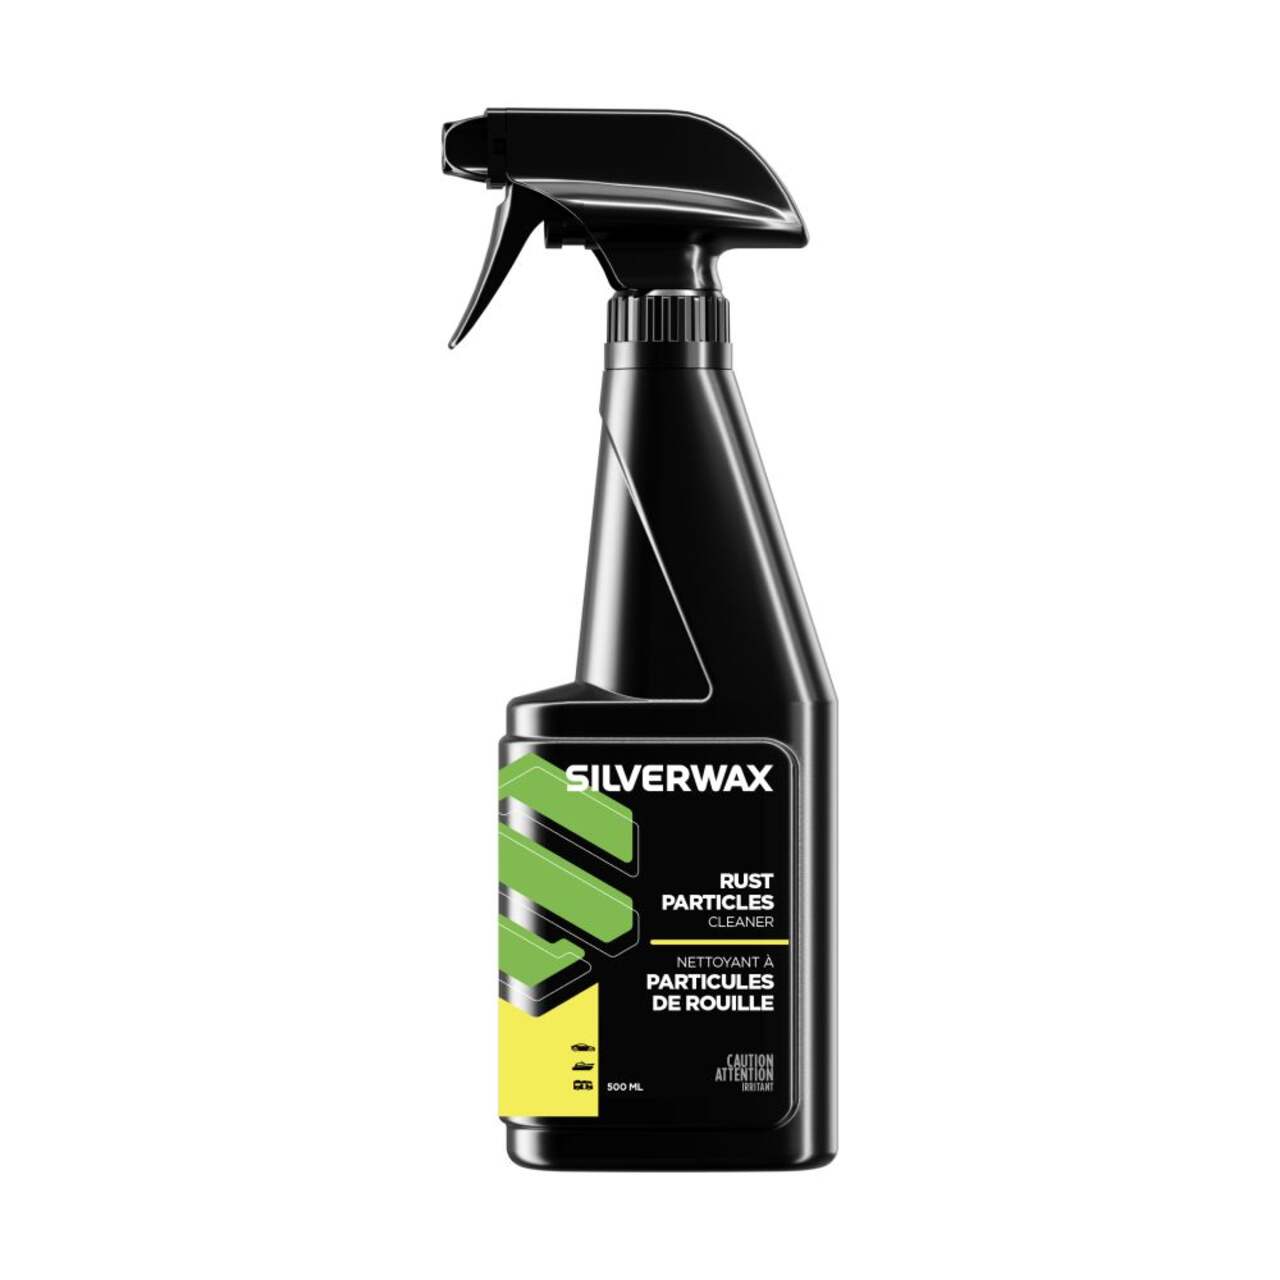 Silverwax Rust Off Car Rust Particle Cleaner Spray, 500-mL